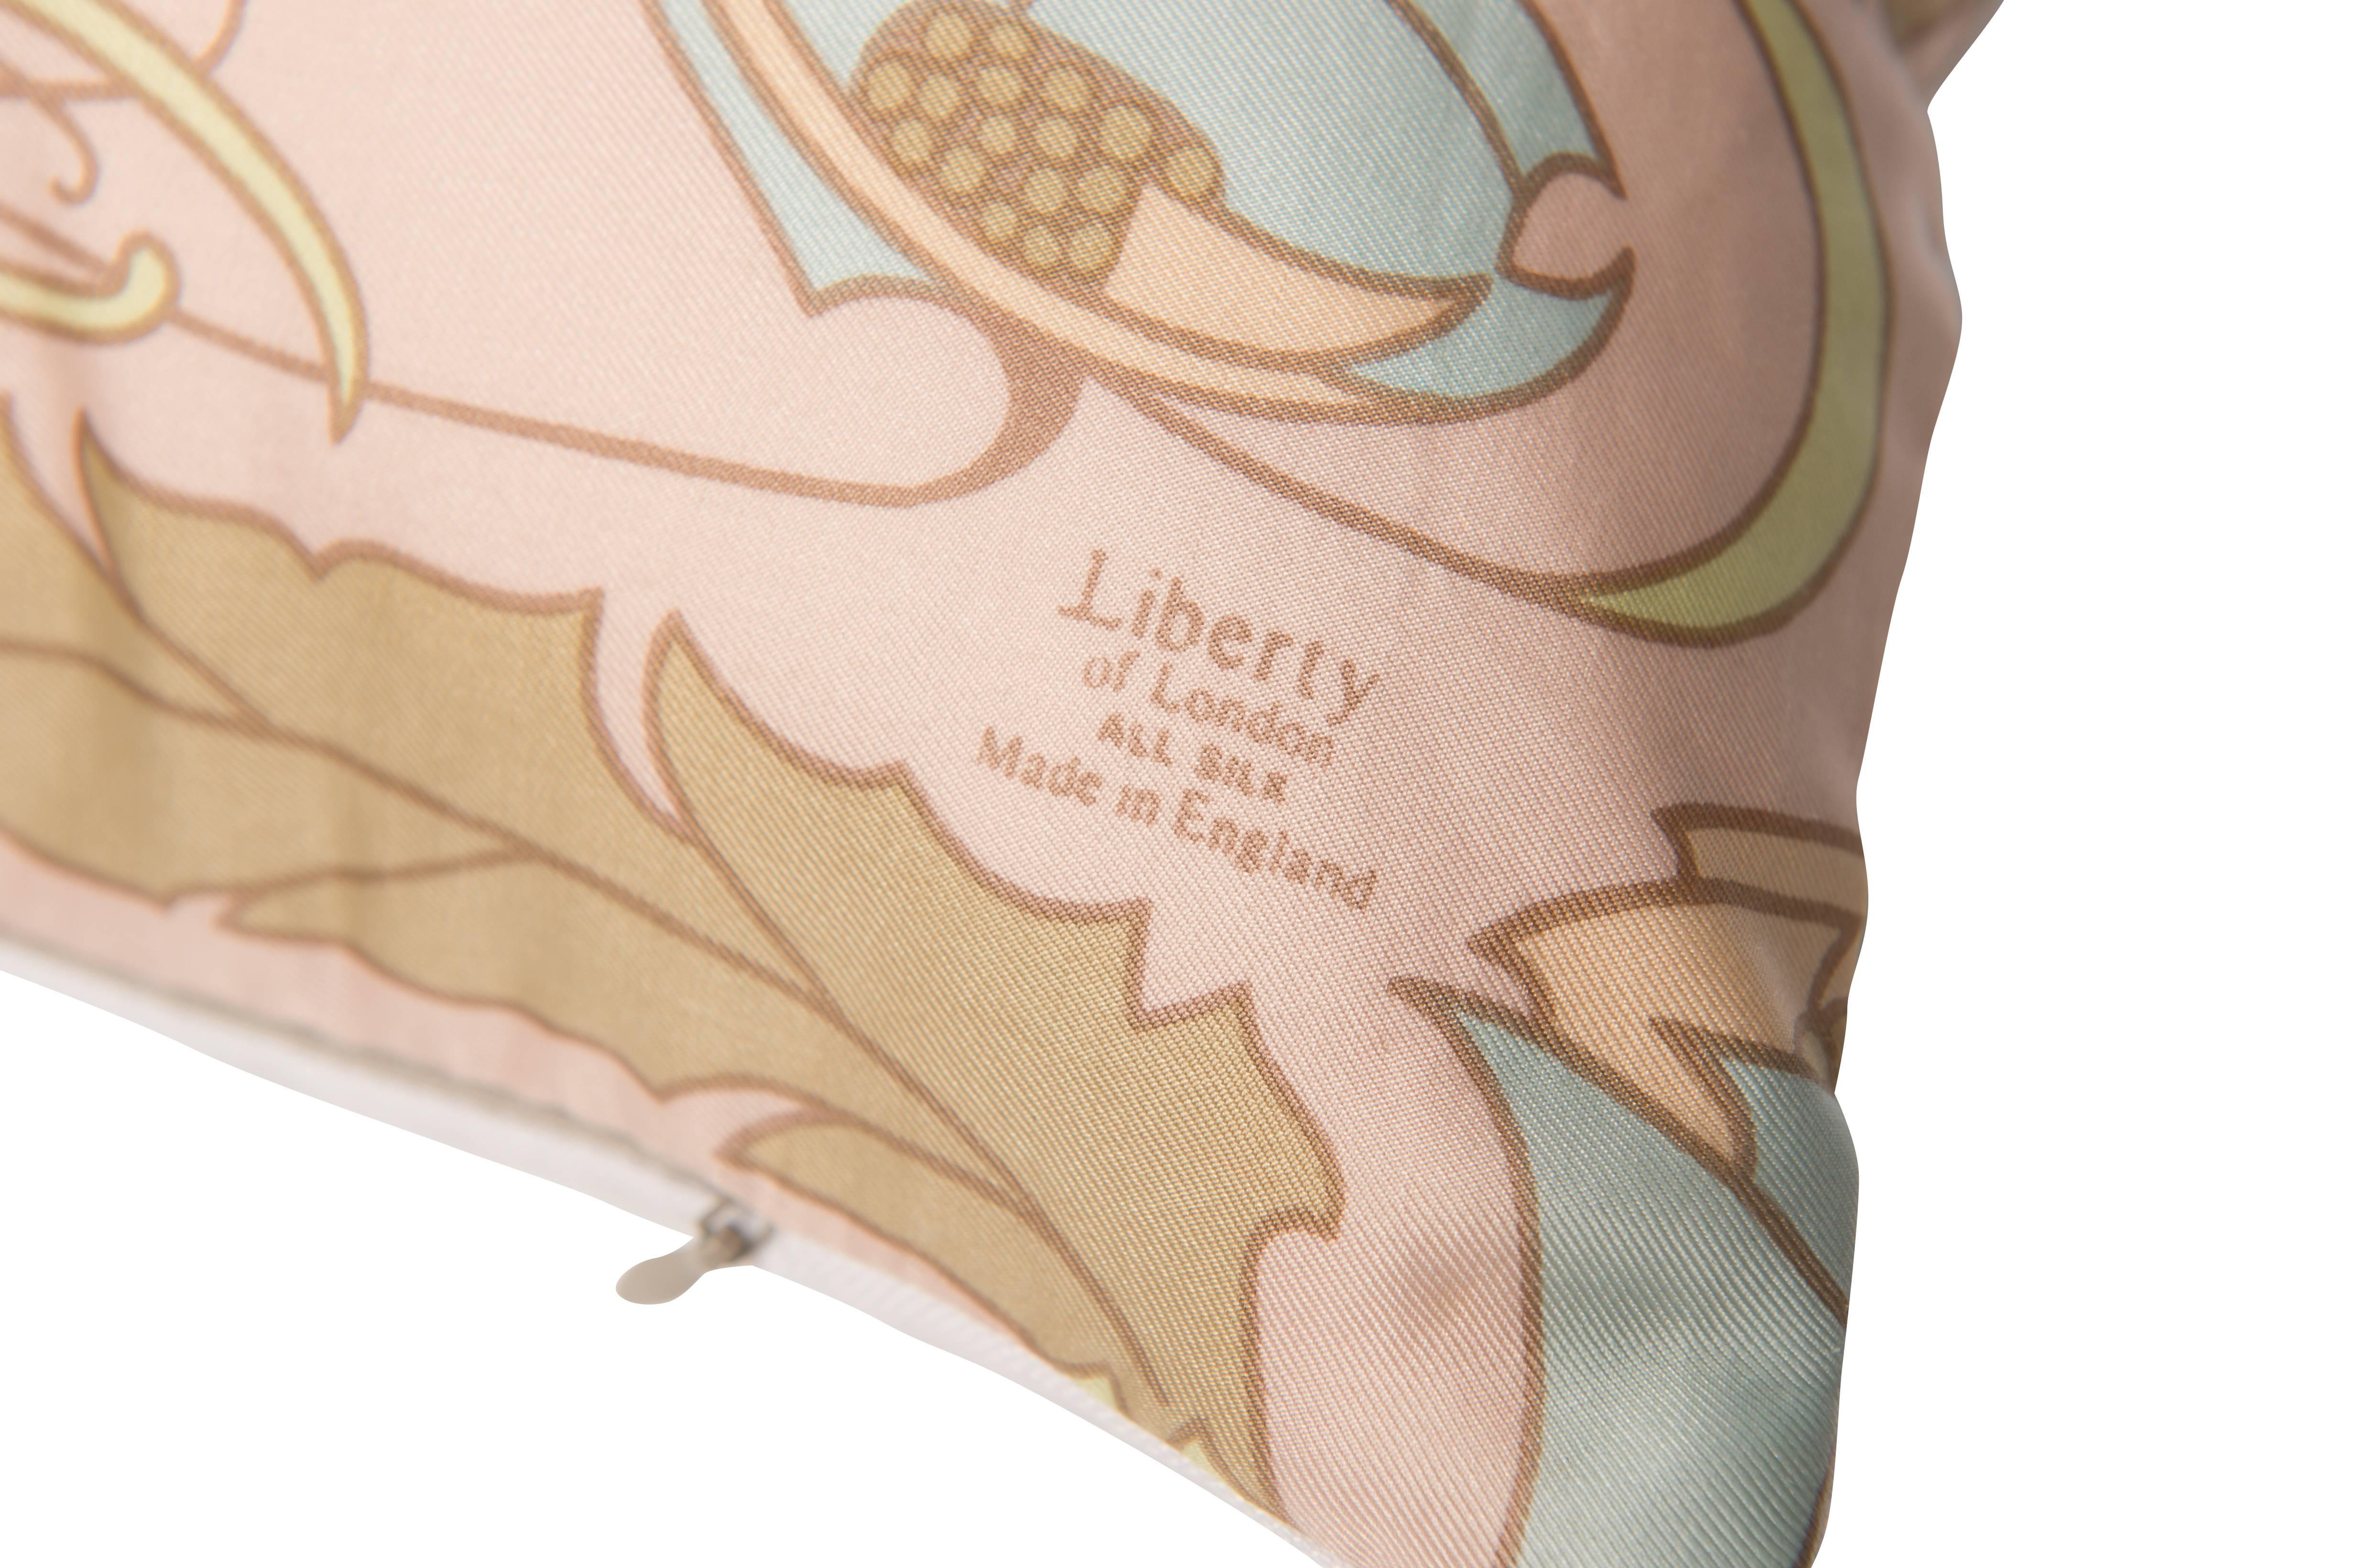 English Pair of Vintage Liberty of London Silk Scarf with Irish Linen Cushions Pillows  For Sale